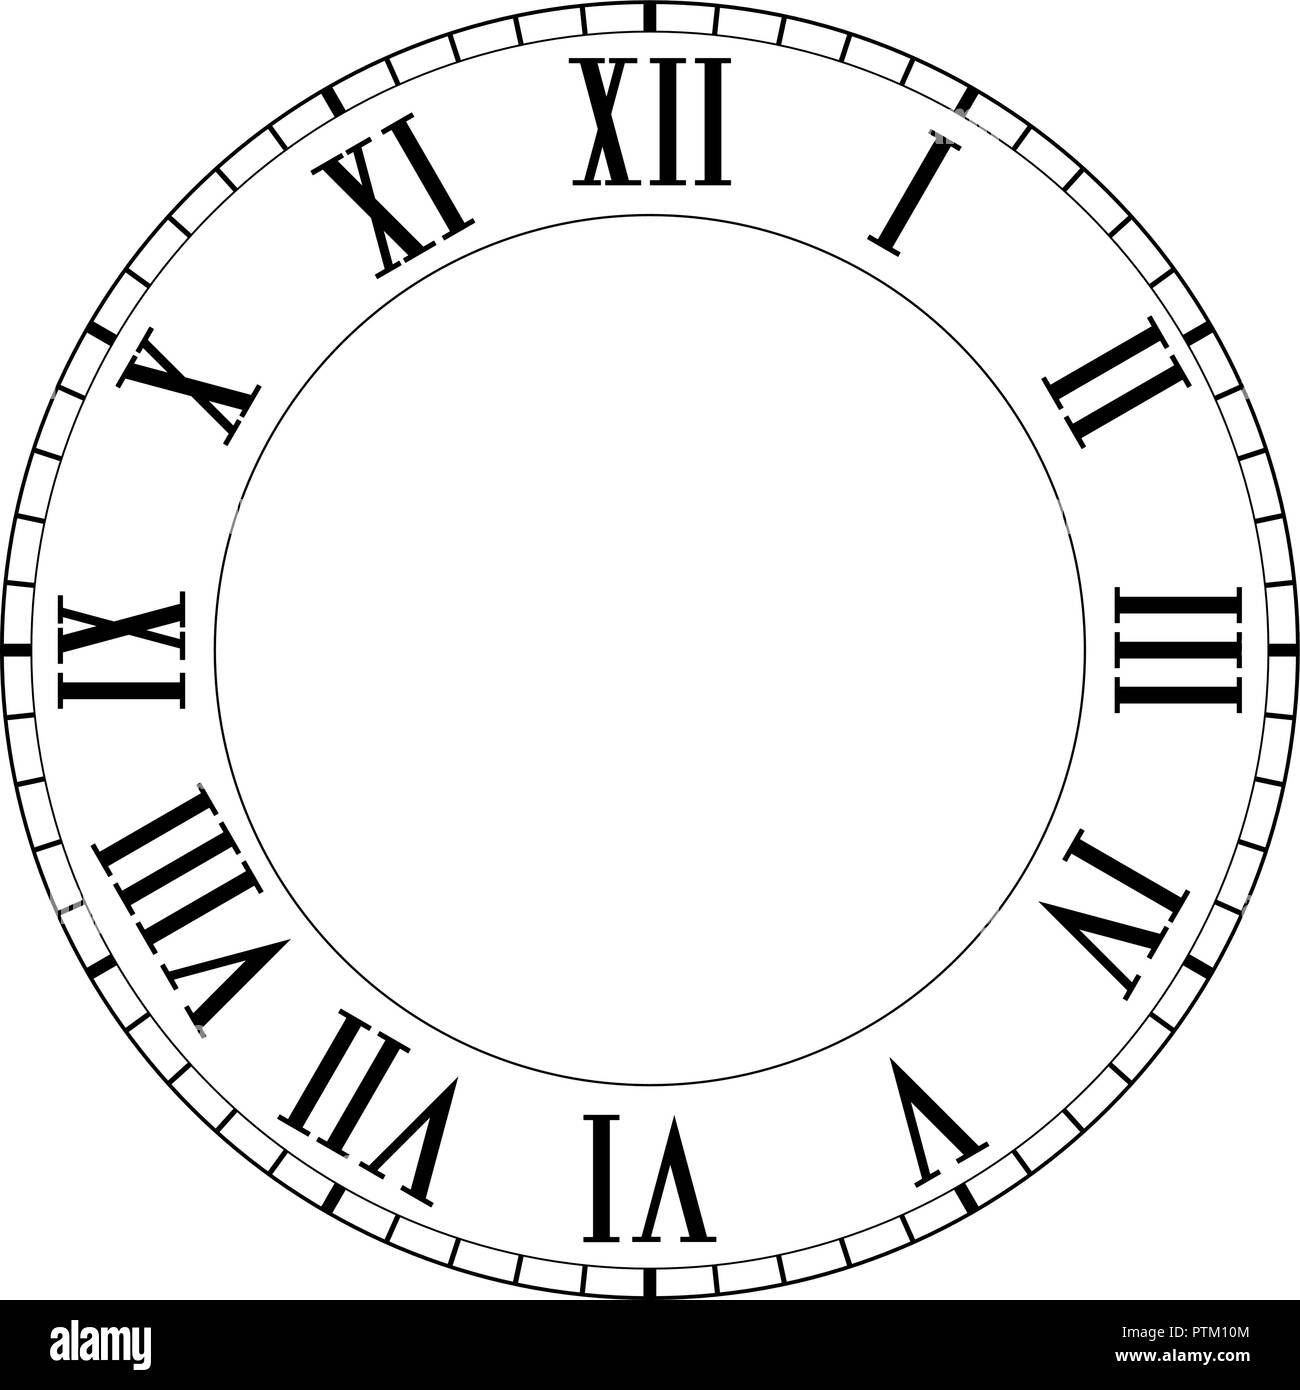 Roman Numeral Pocket Watch Drawing / However, there are also some ...